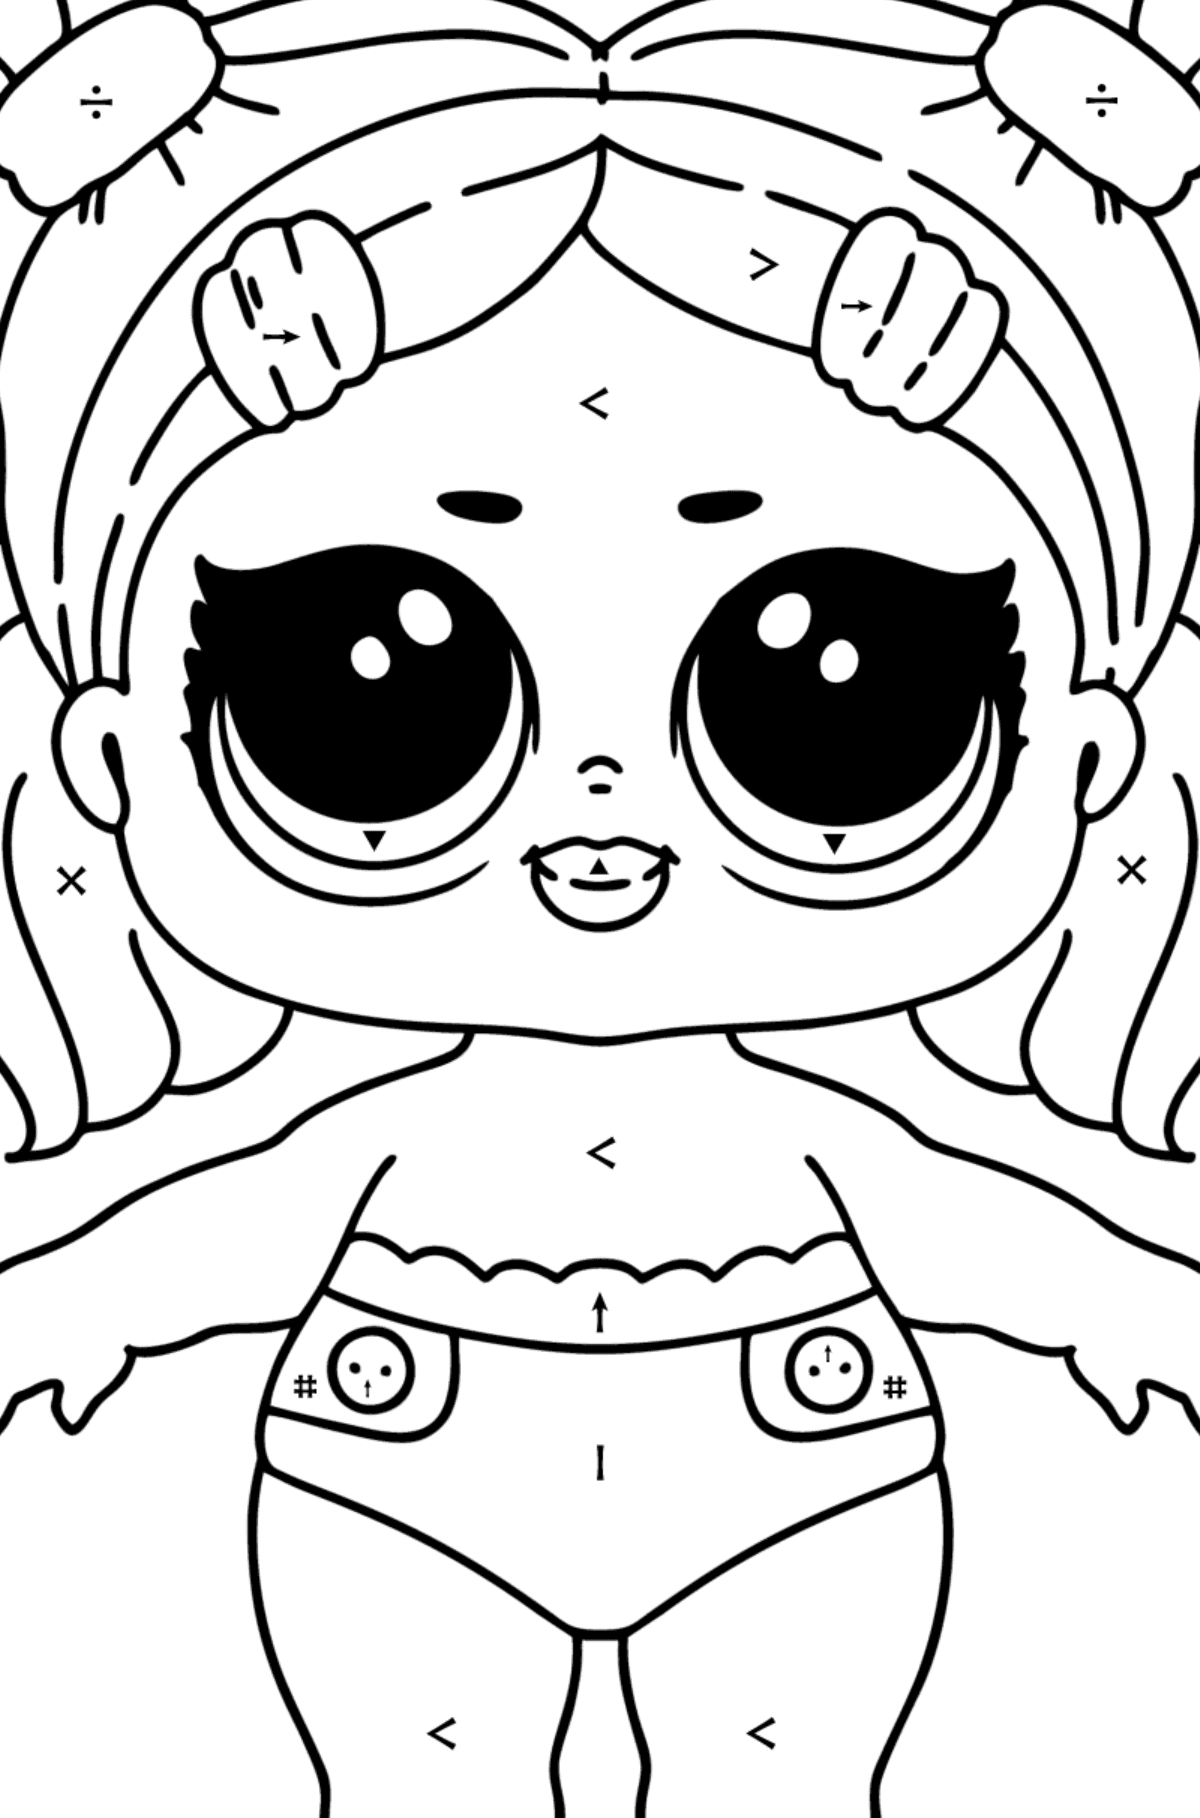 Coloring page LOL LIL Dusk - Coloring by Symbols for Kids